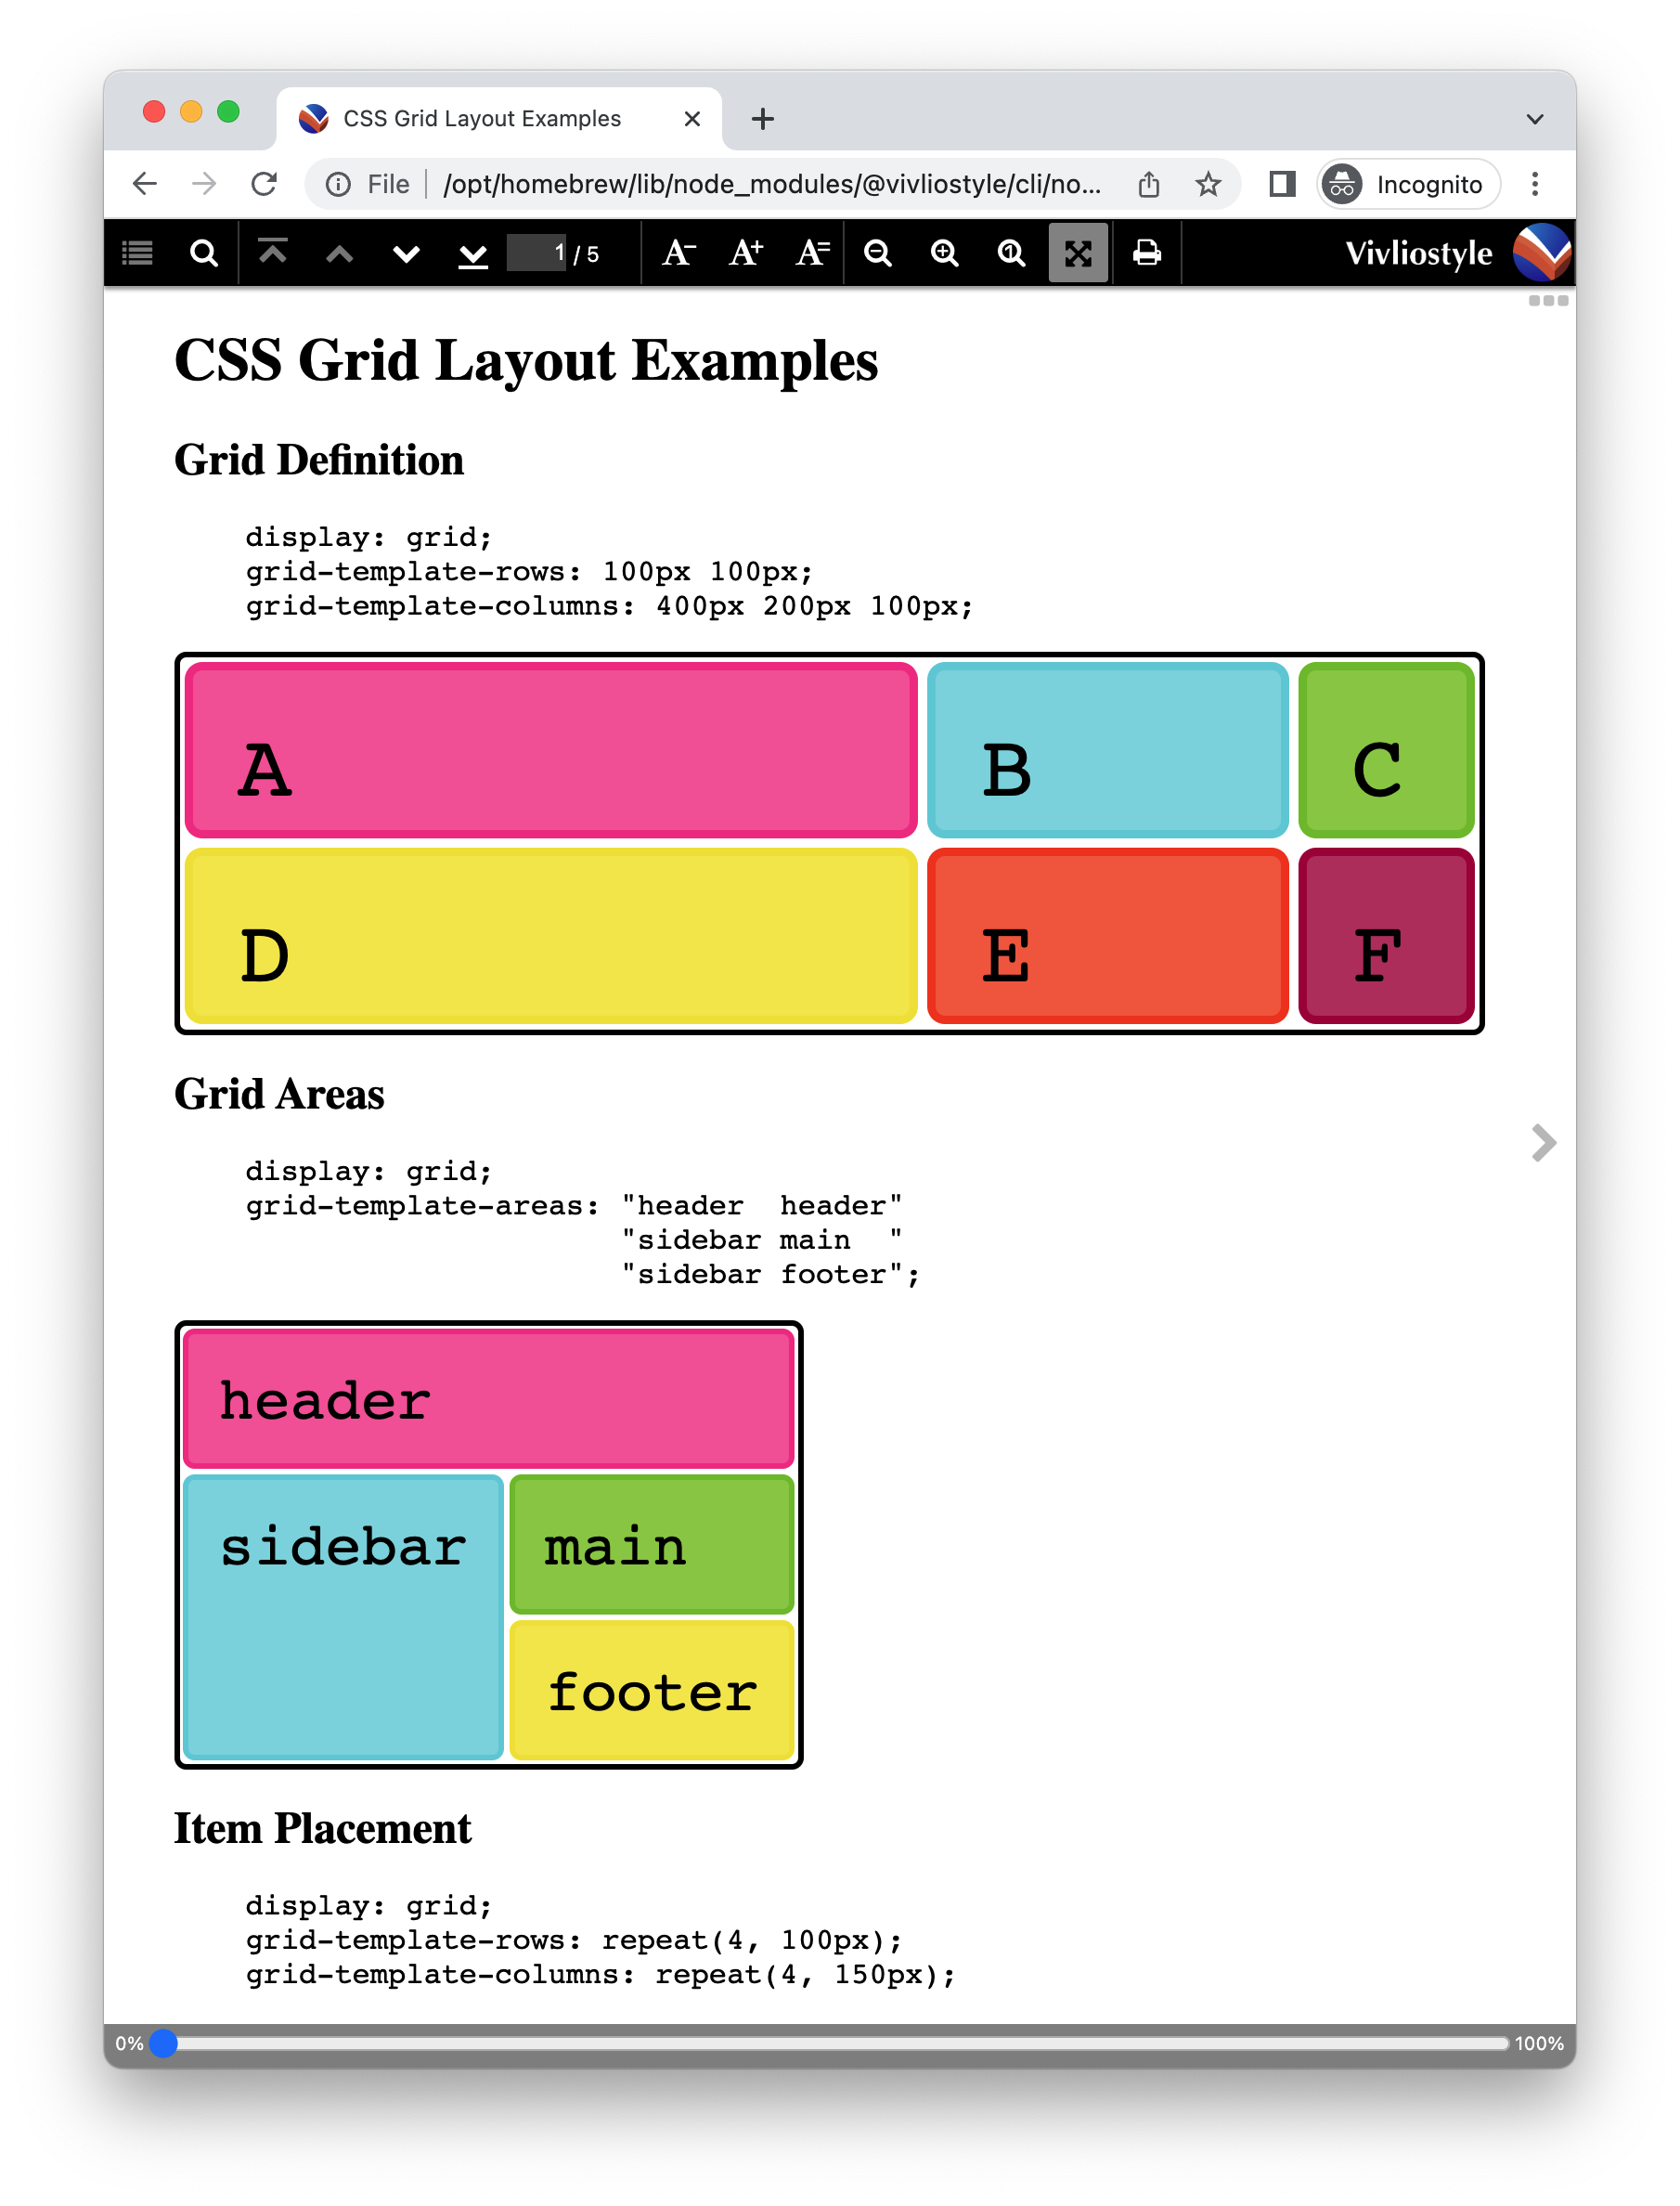 CSS Grid Layout ExamplesをVivliostyle CLIのpreviewで表示